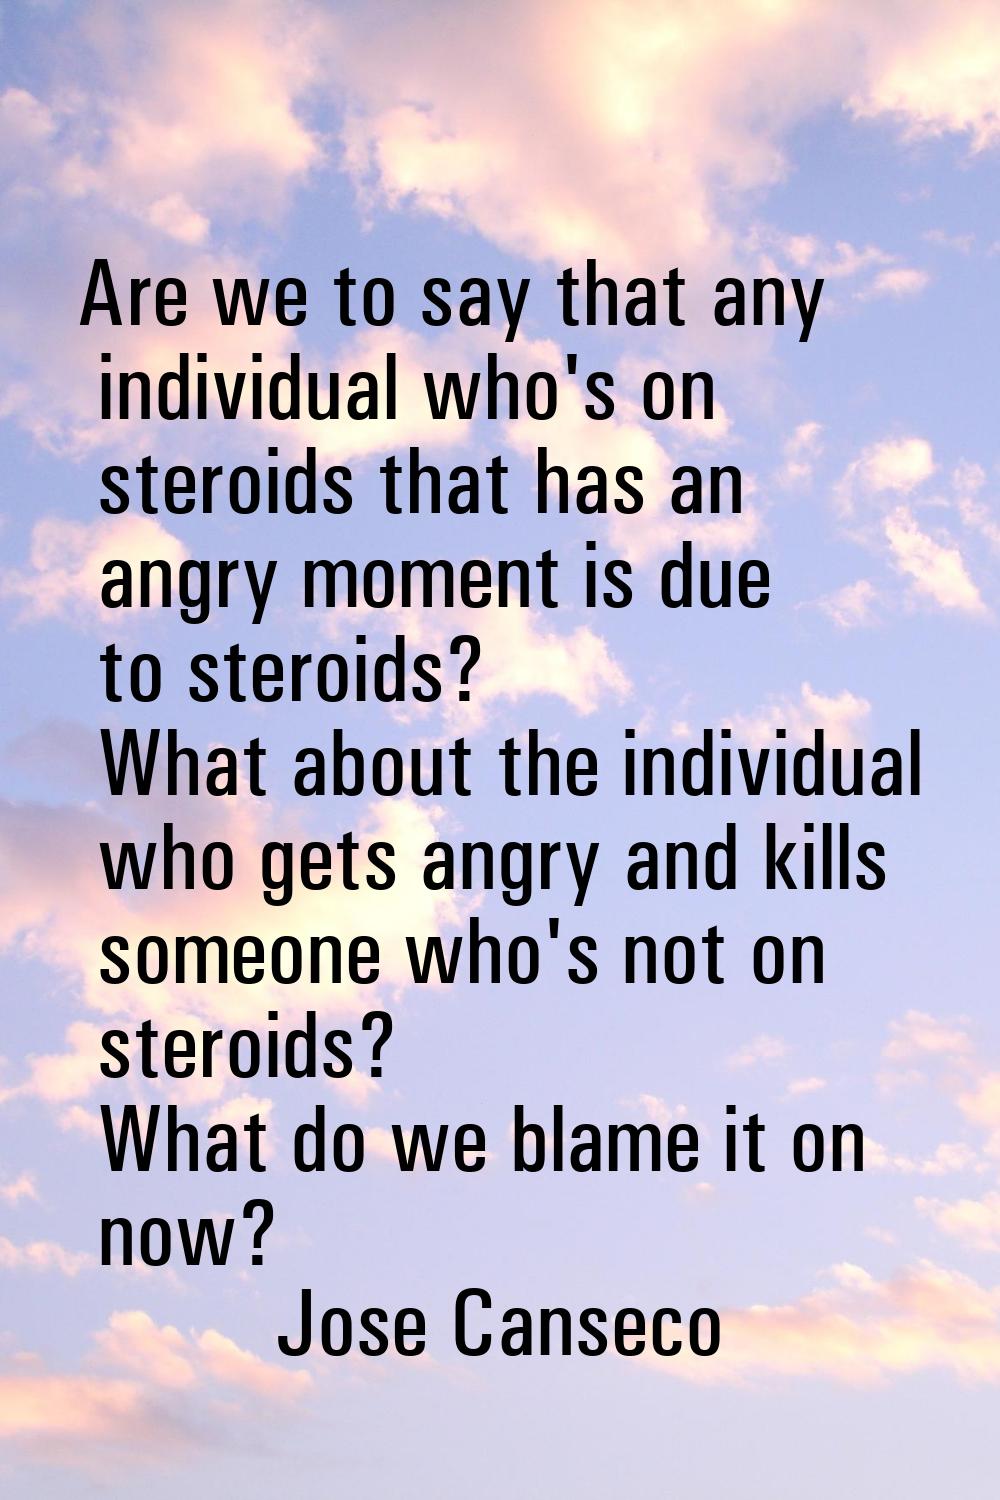 Are we to say that any individual who's on steroids that has an angry moment is due to steroids? Wh